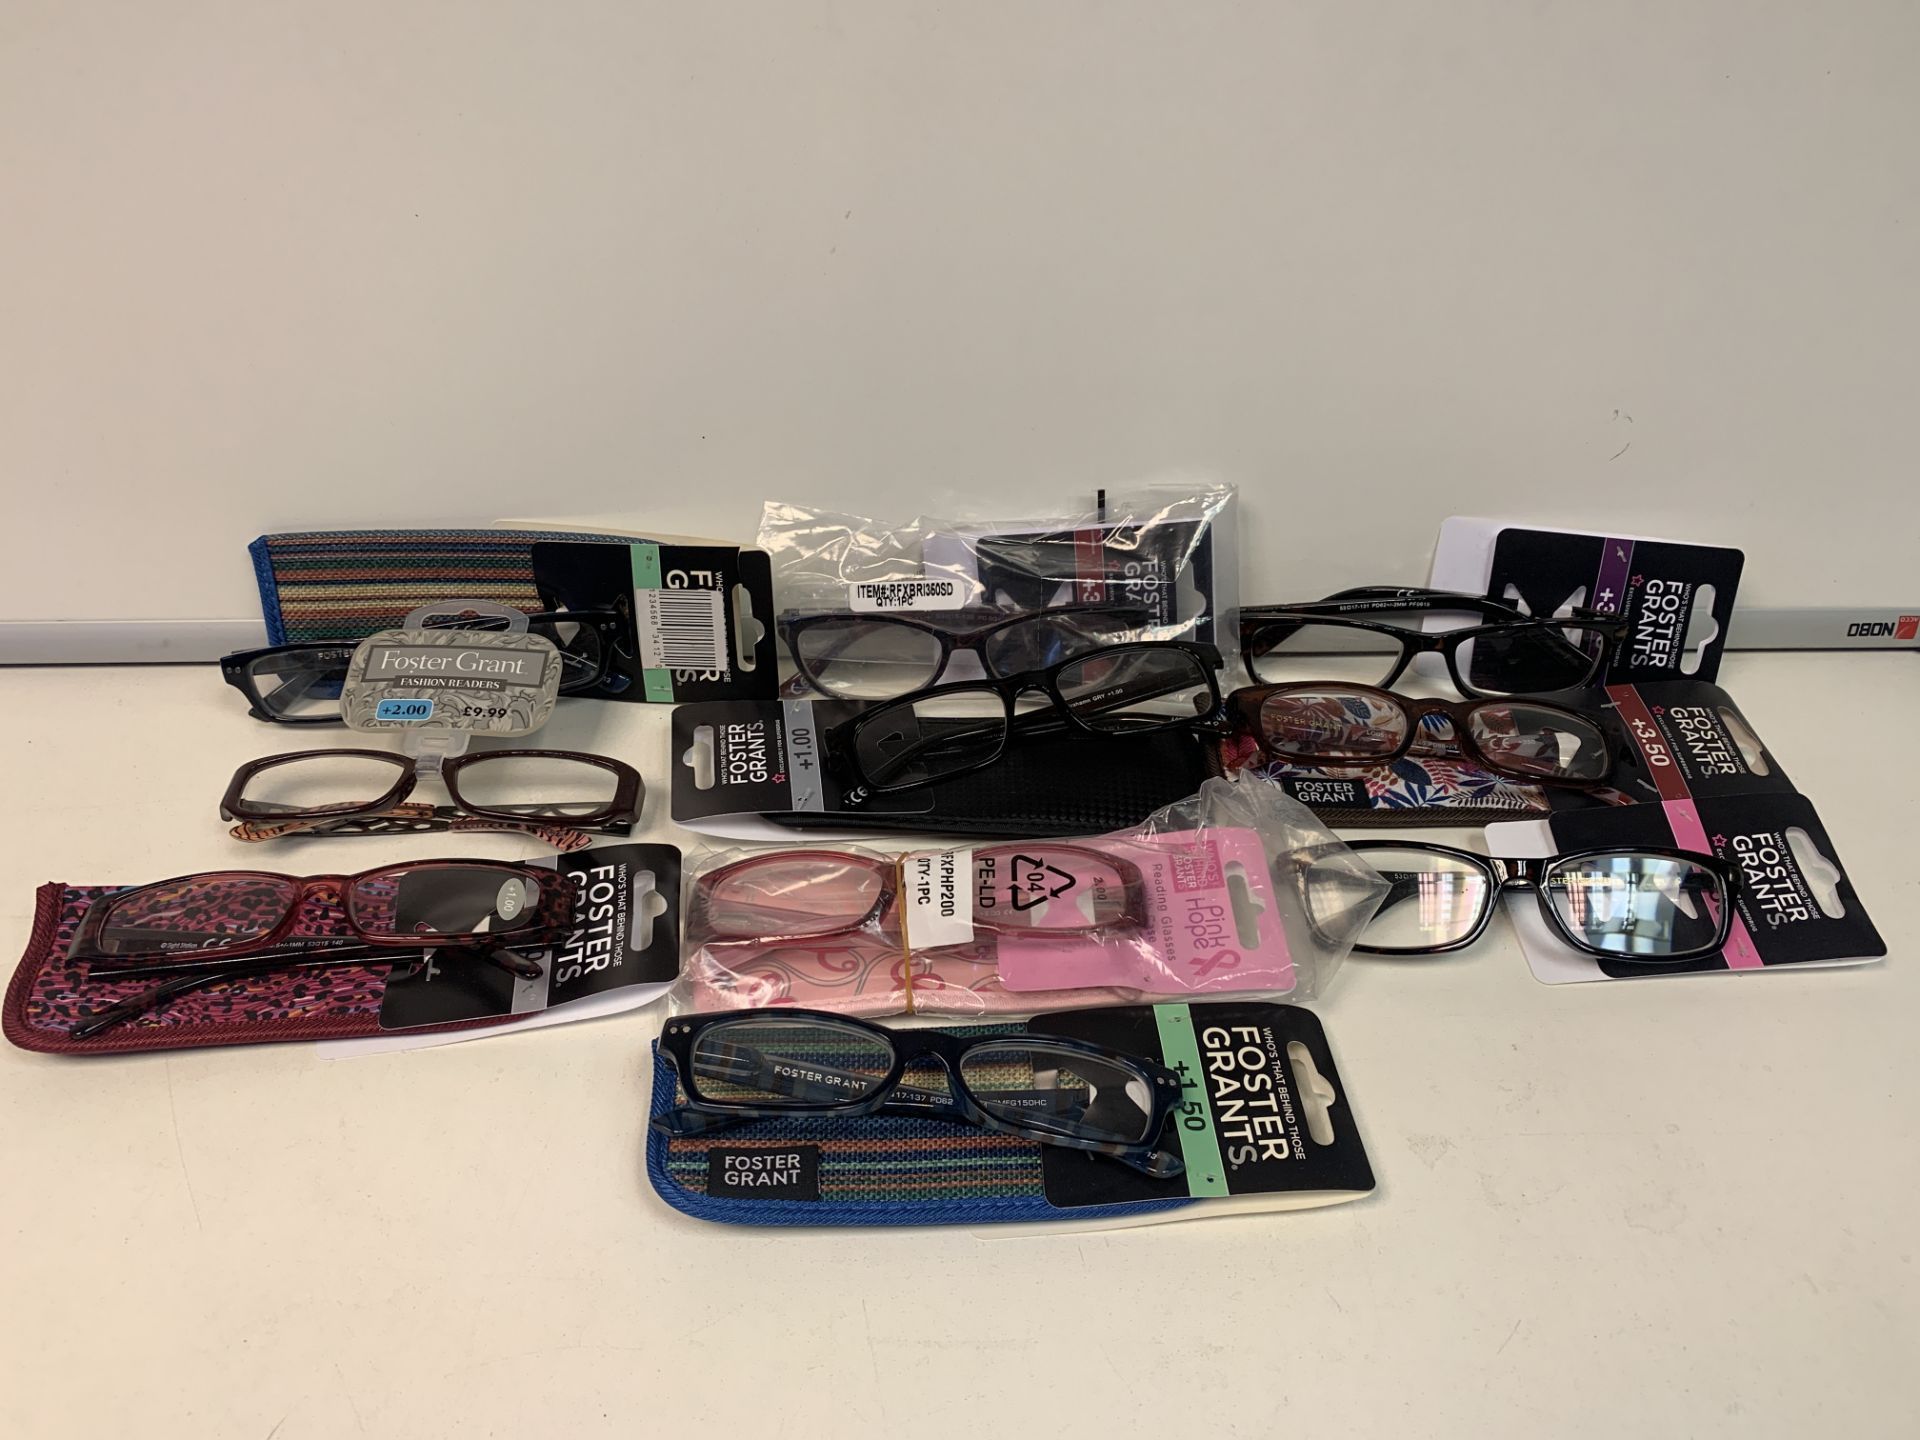 40 x NEW PACKAGED PAIRS OF ASSORTED FOSTER GRANTS READING GLASSES. ASSORTED STYLES/STRENGTHS.